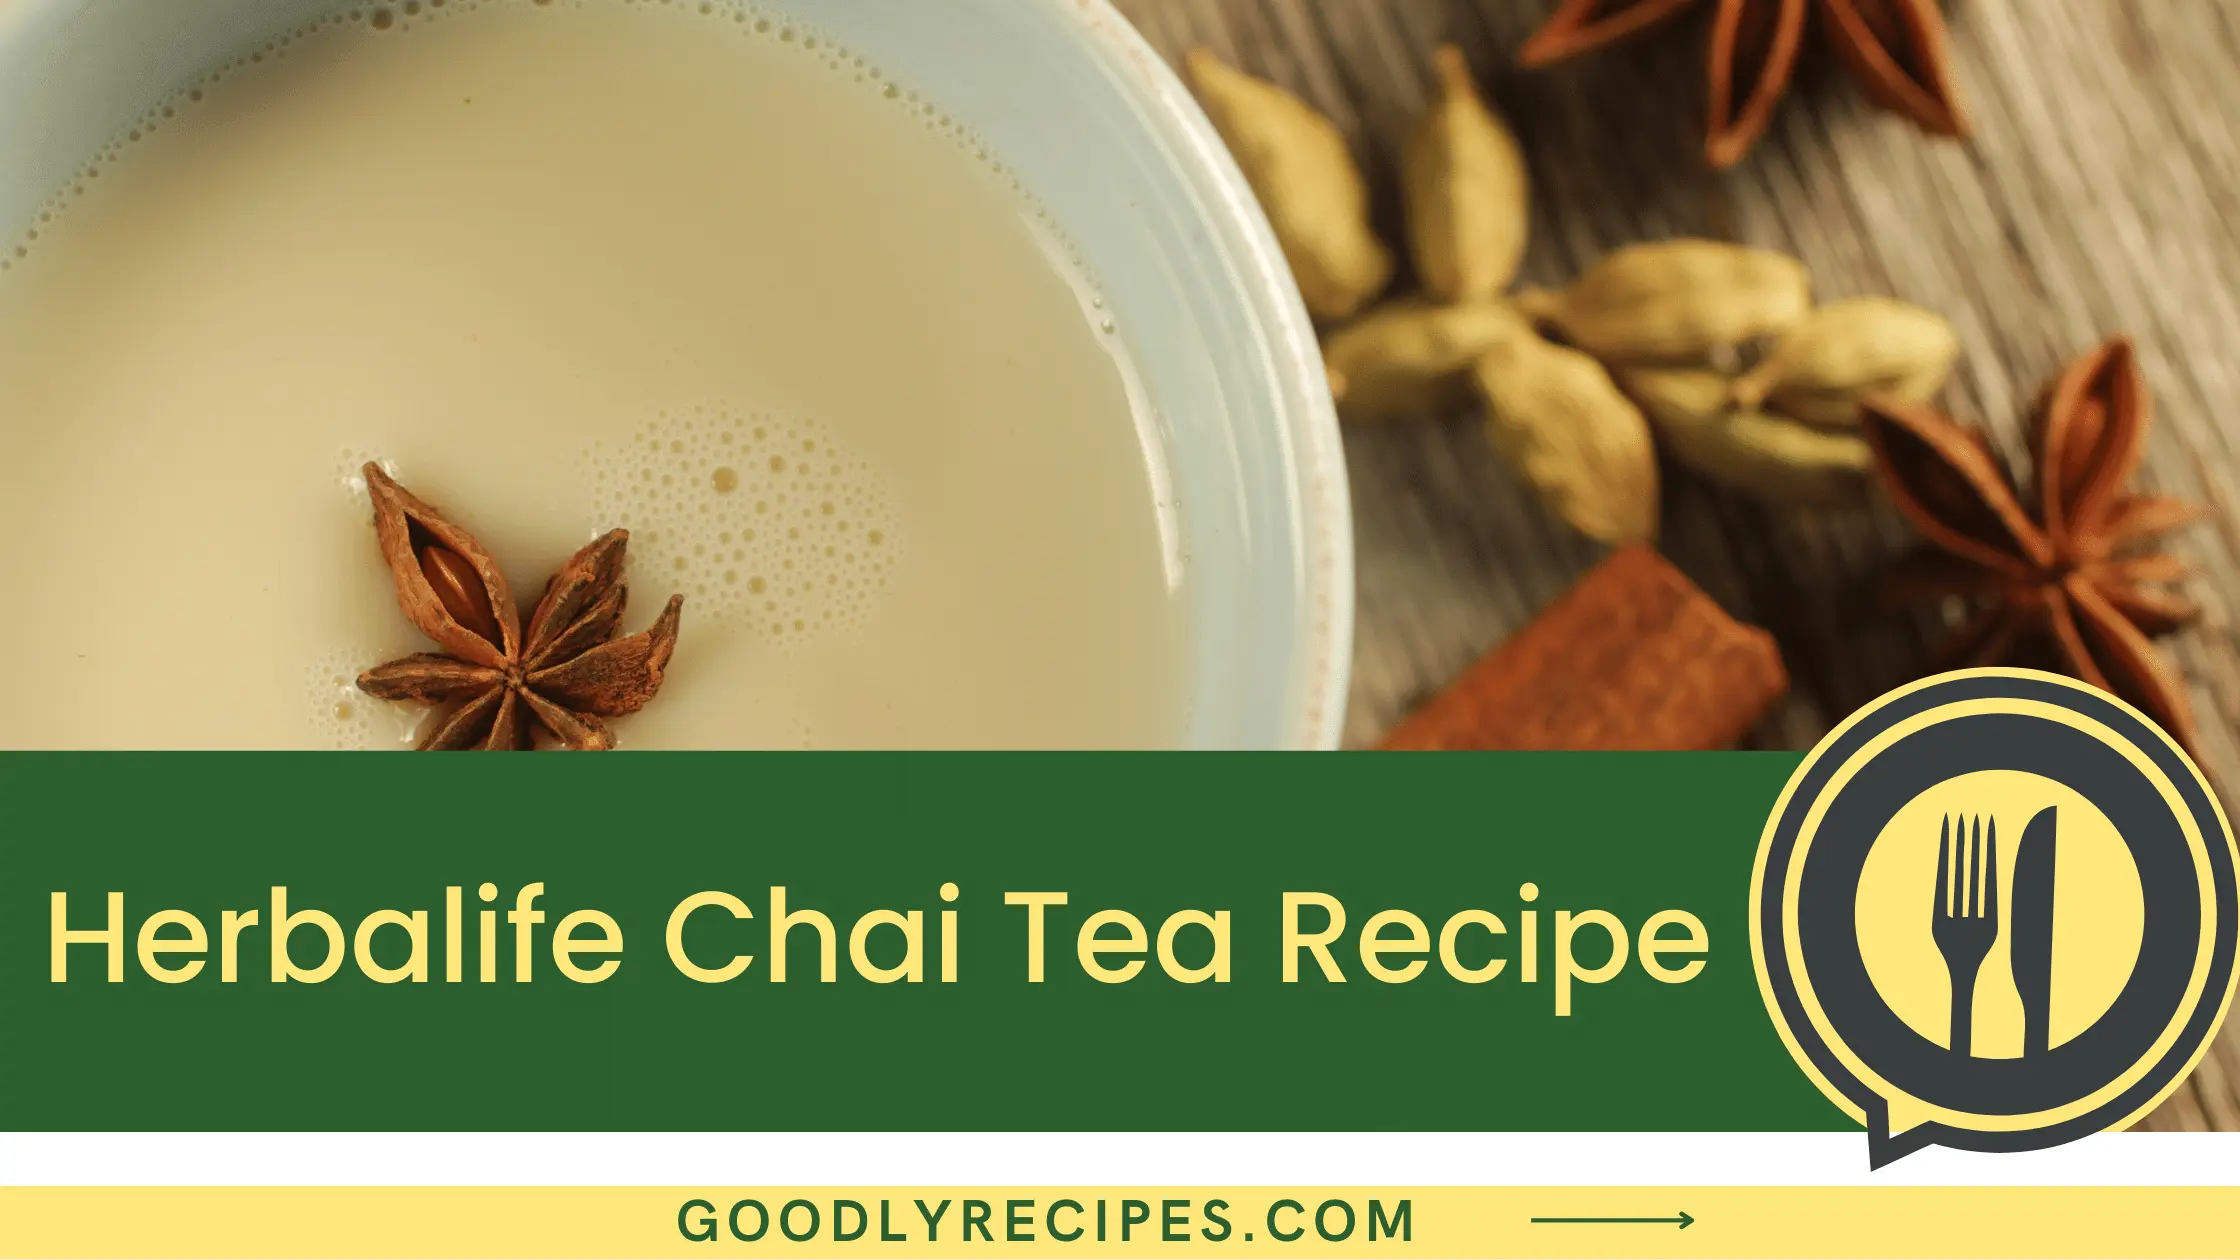 Herbalife Chai Tea Recipes - For Food Lovers